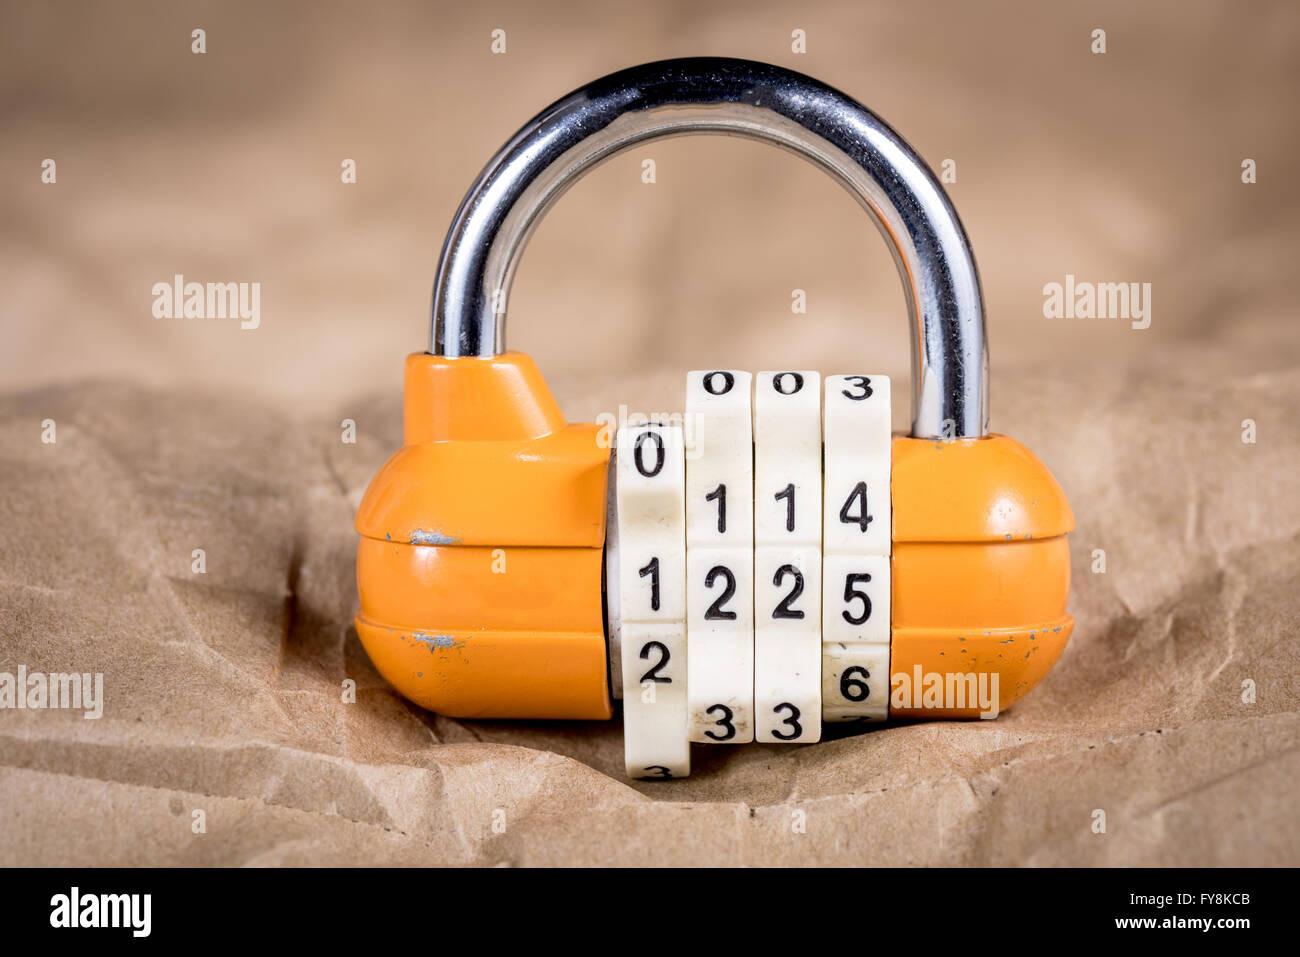 Fancy combination lock with the date of Christmas dialed in it Stock Photo